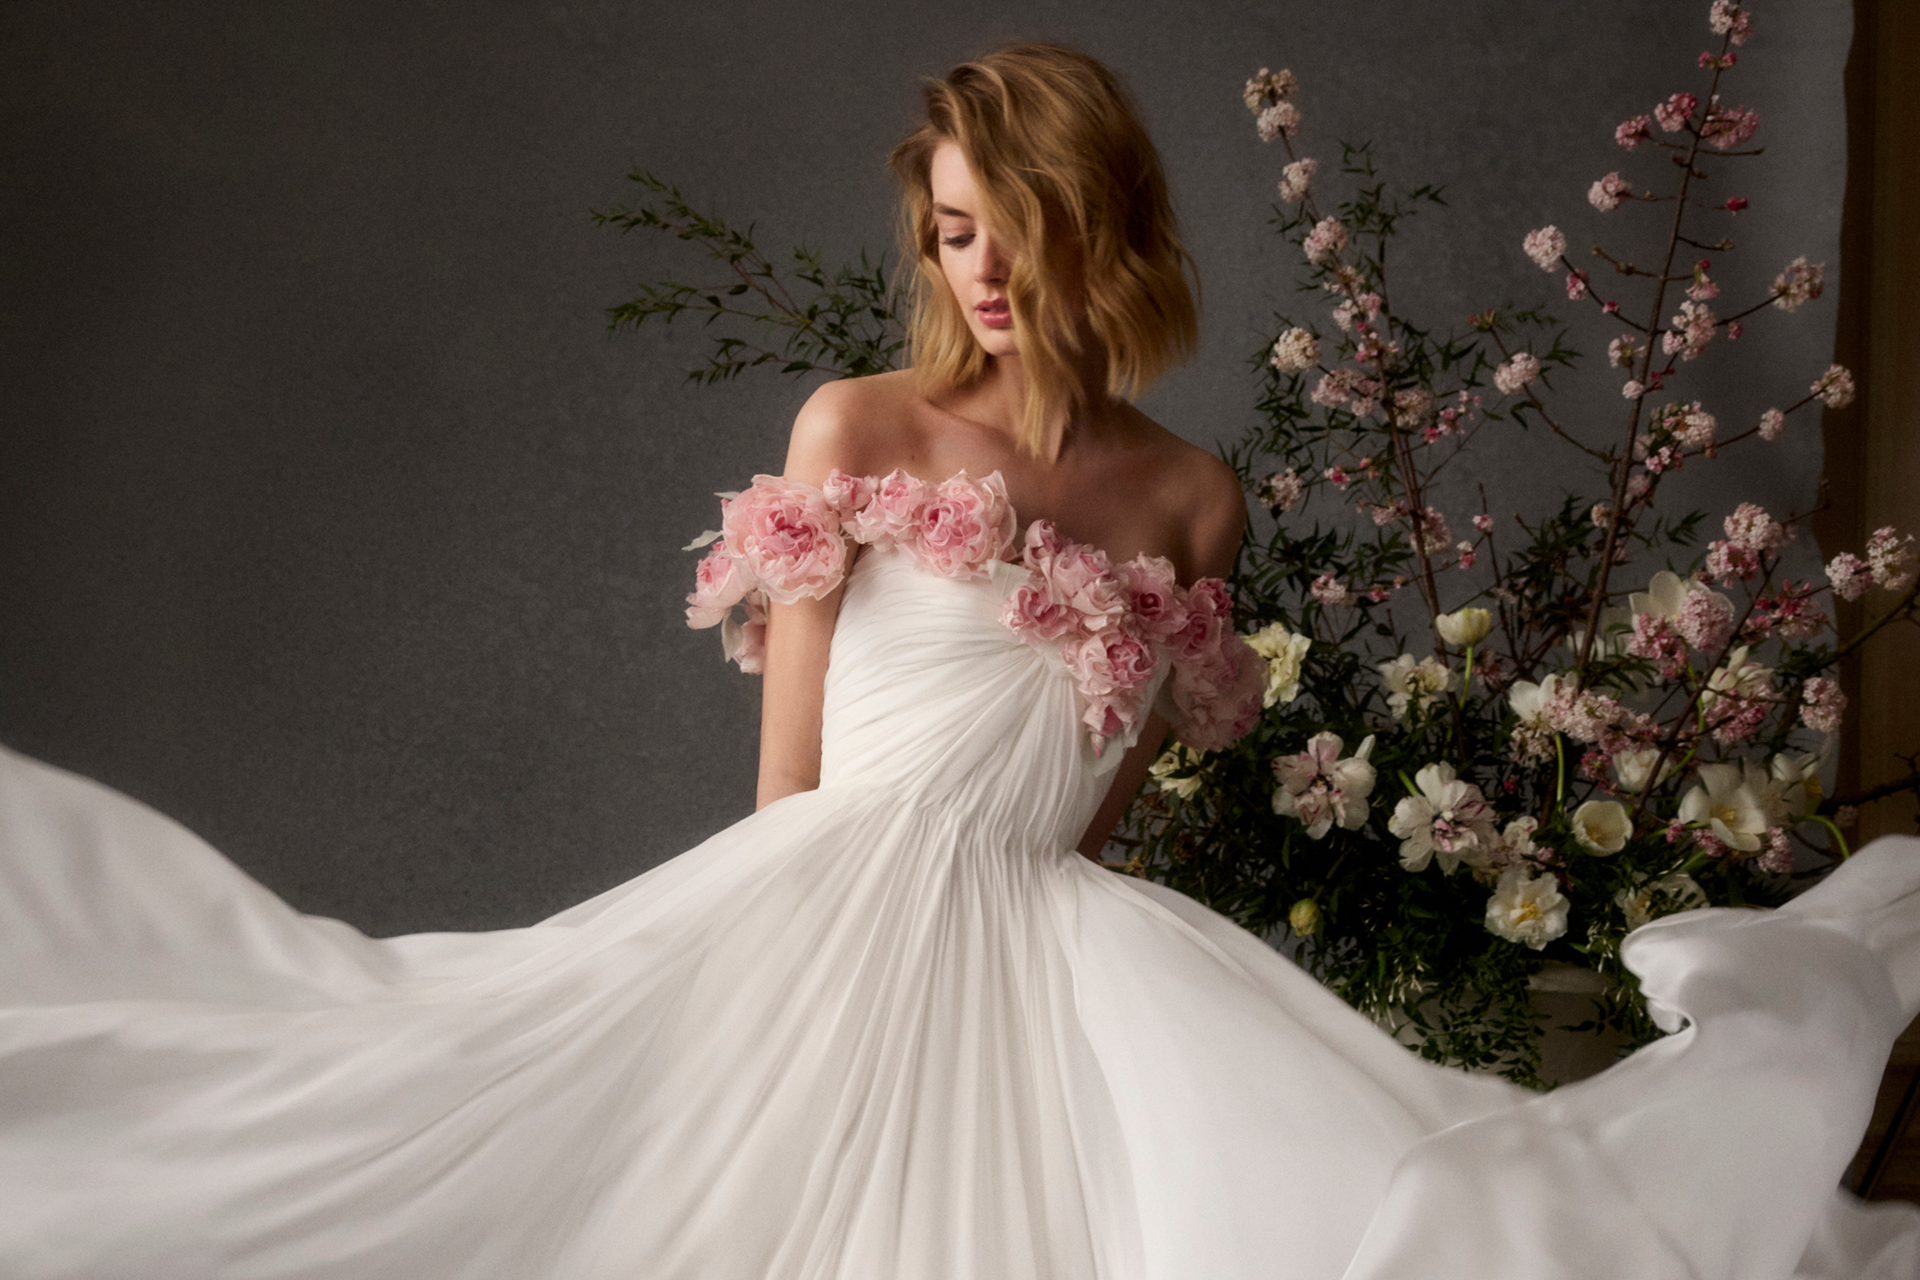 Our Top 10 Favorite Wedding Dresses by Italian Designers